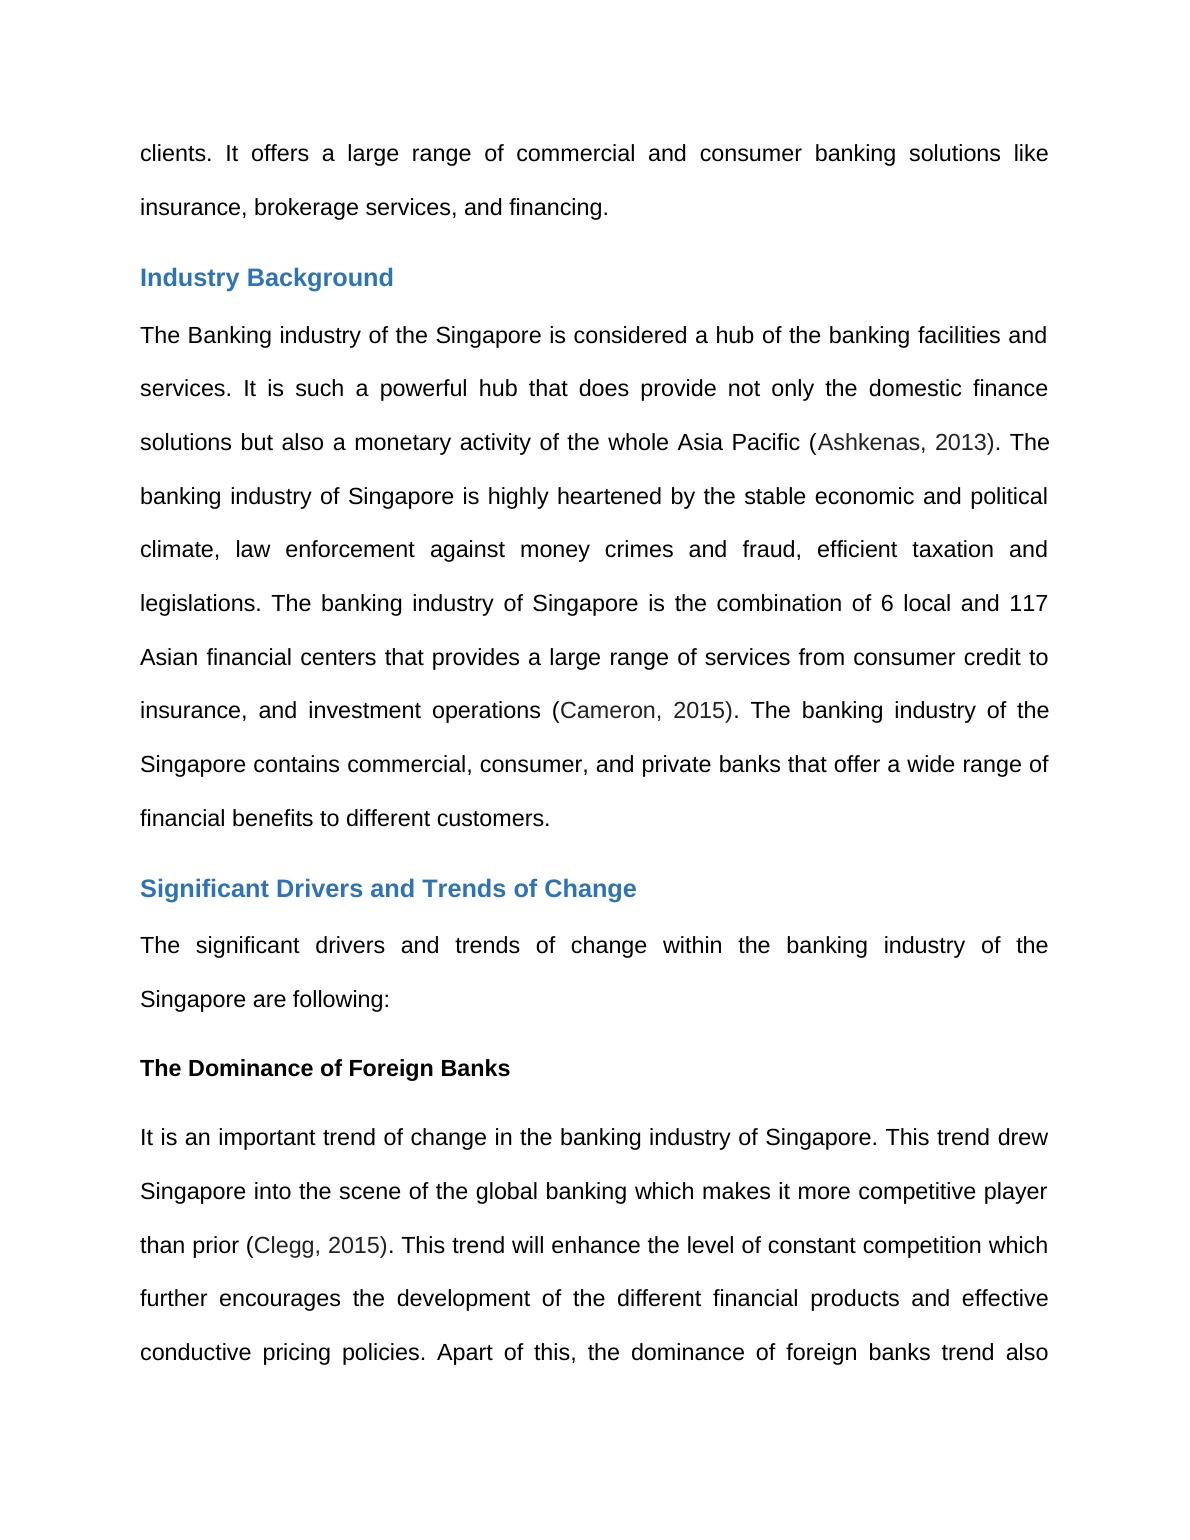 Paper on Banking Industry: Bank of Singapore_4